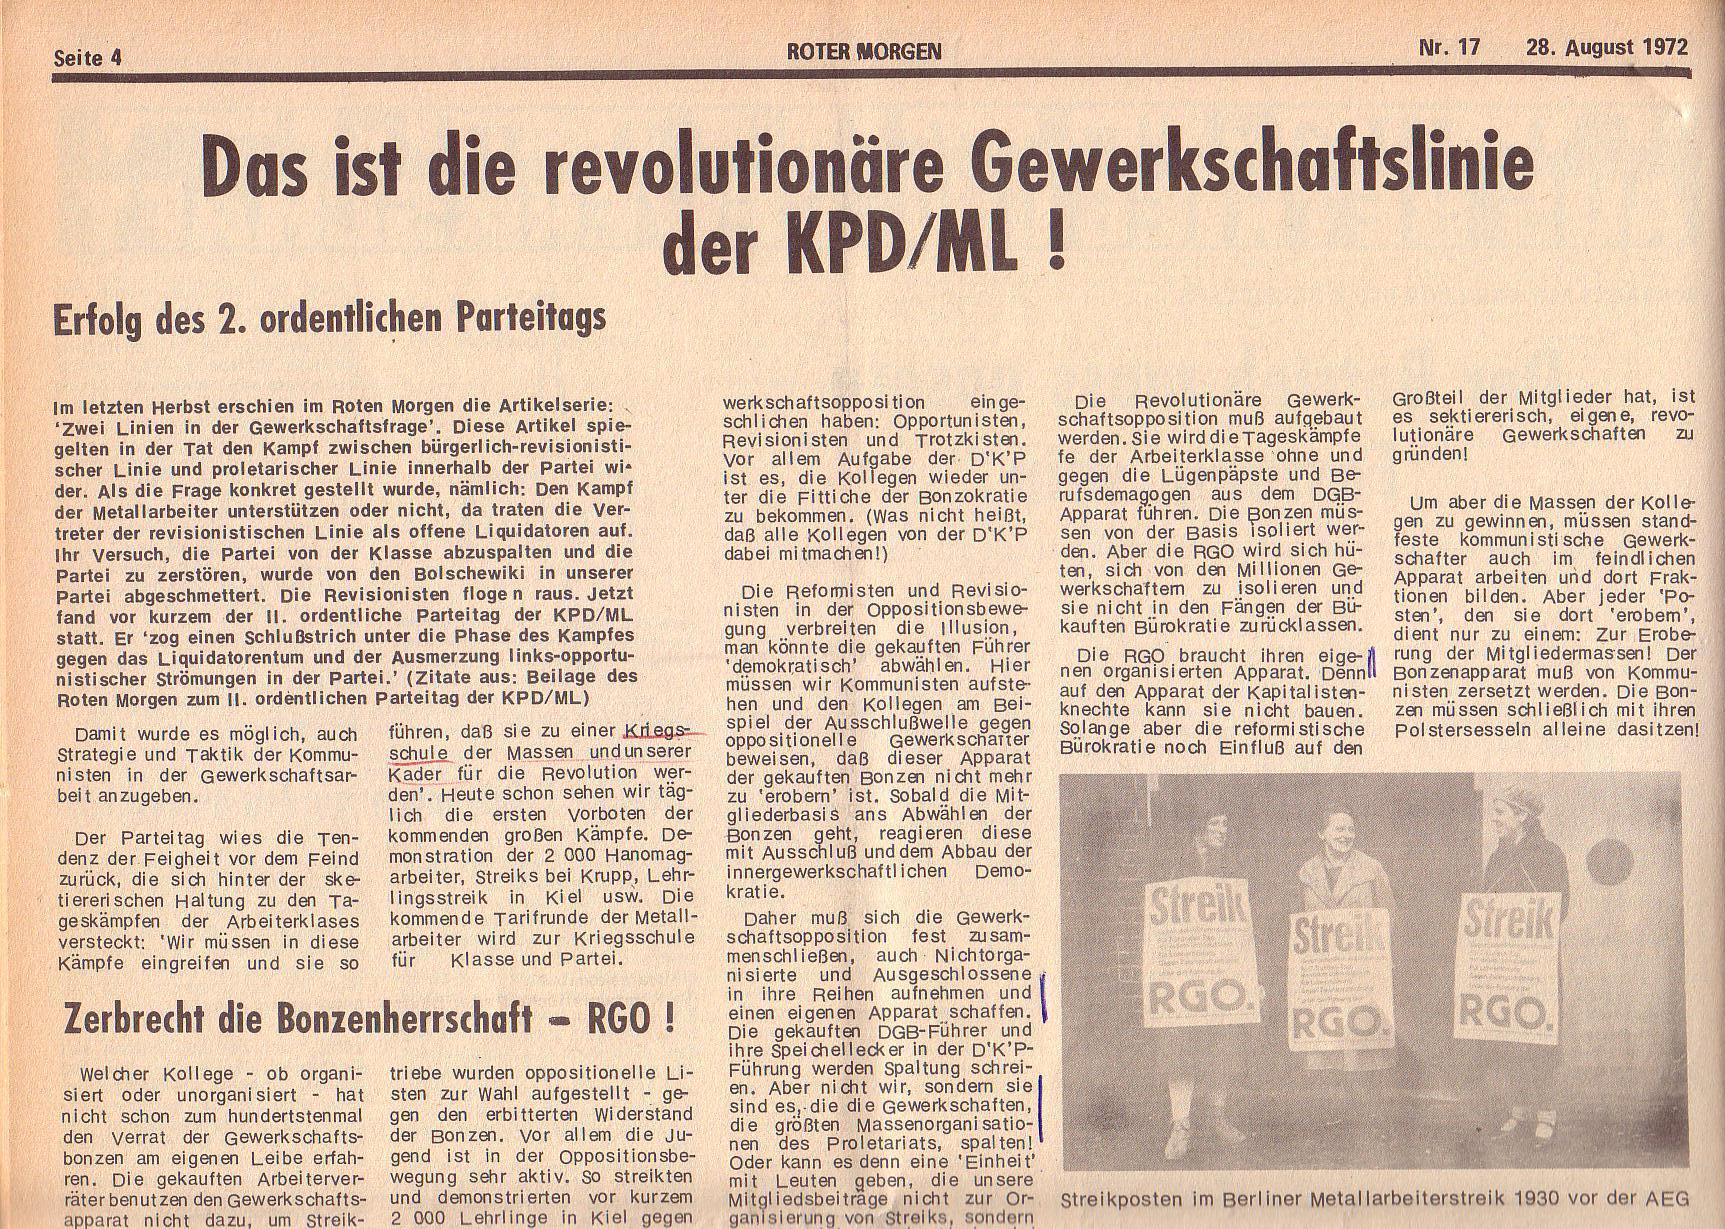 Roter Morgen, 6. Jg., 28. August 1972, Nr. 17, Seite 4a